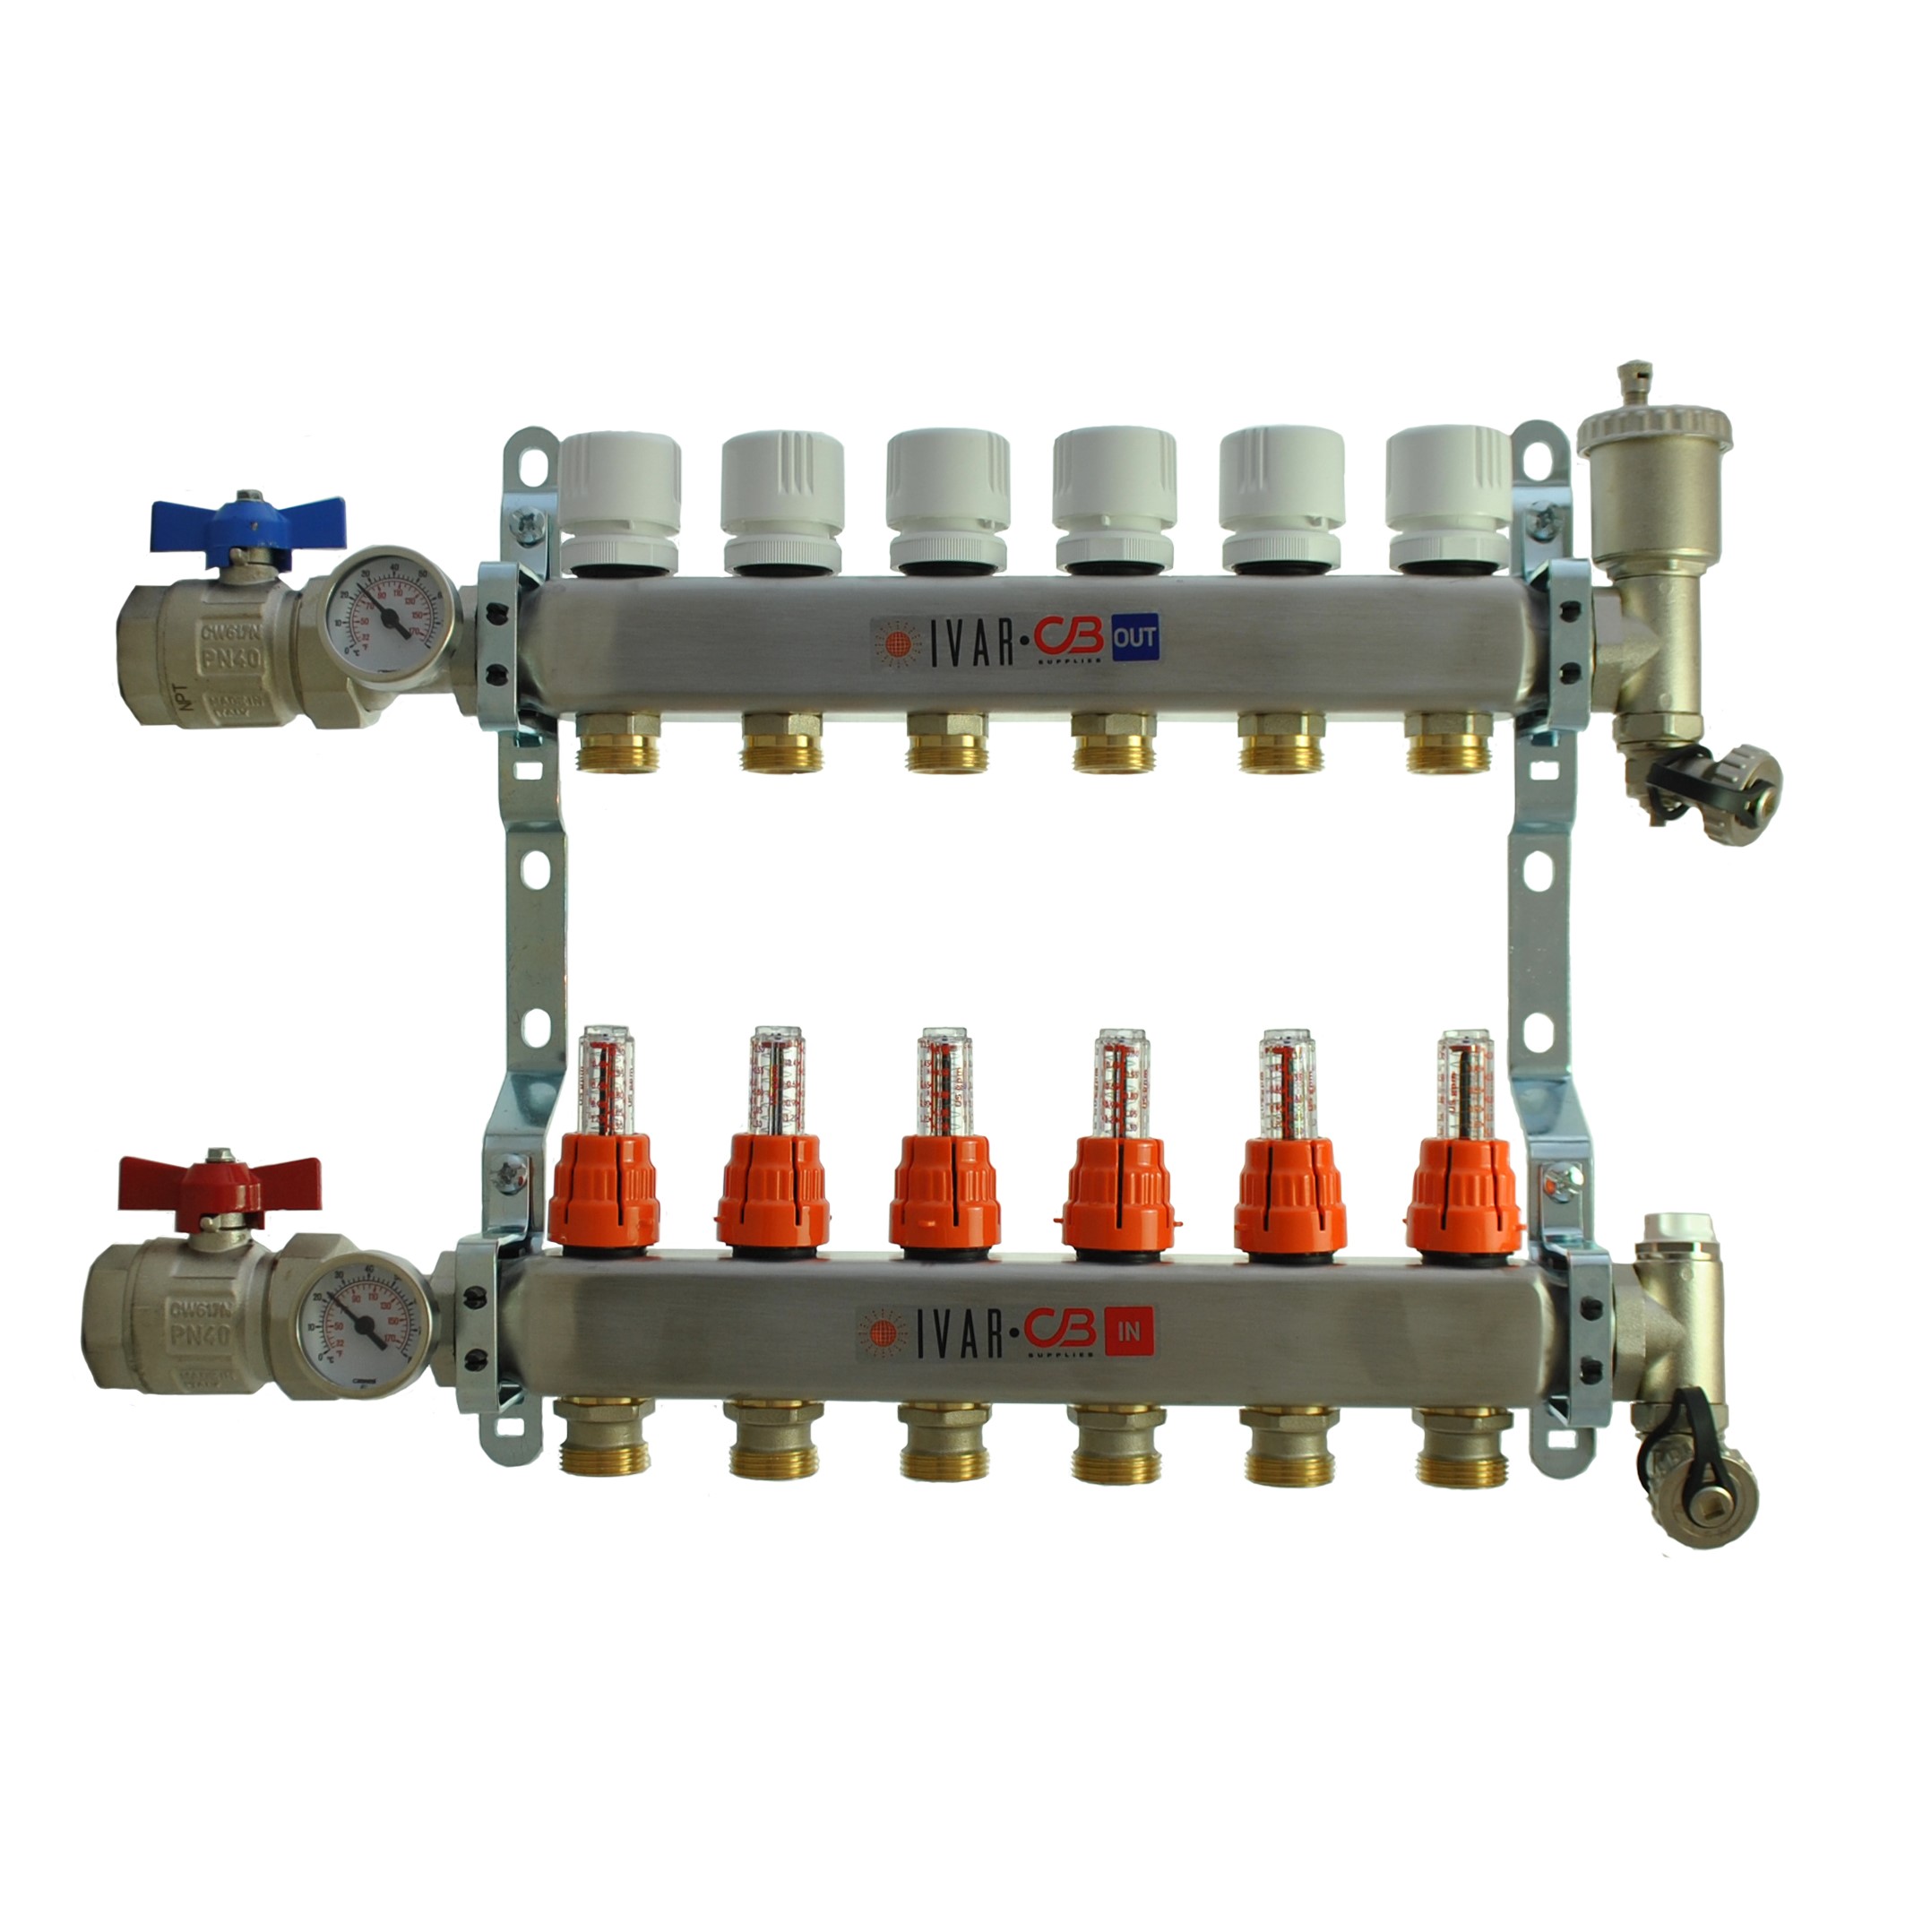 1" IVAR Stainless Steel Hydronic Manifold for Radiant Floor Heating - 6 ports